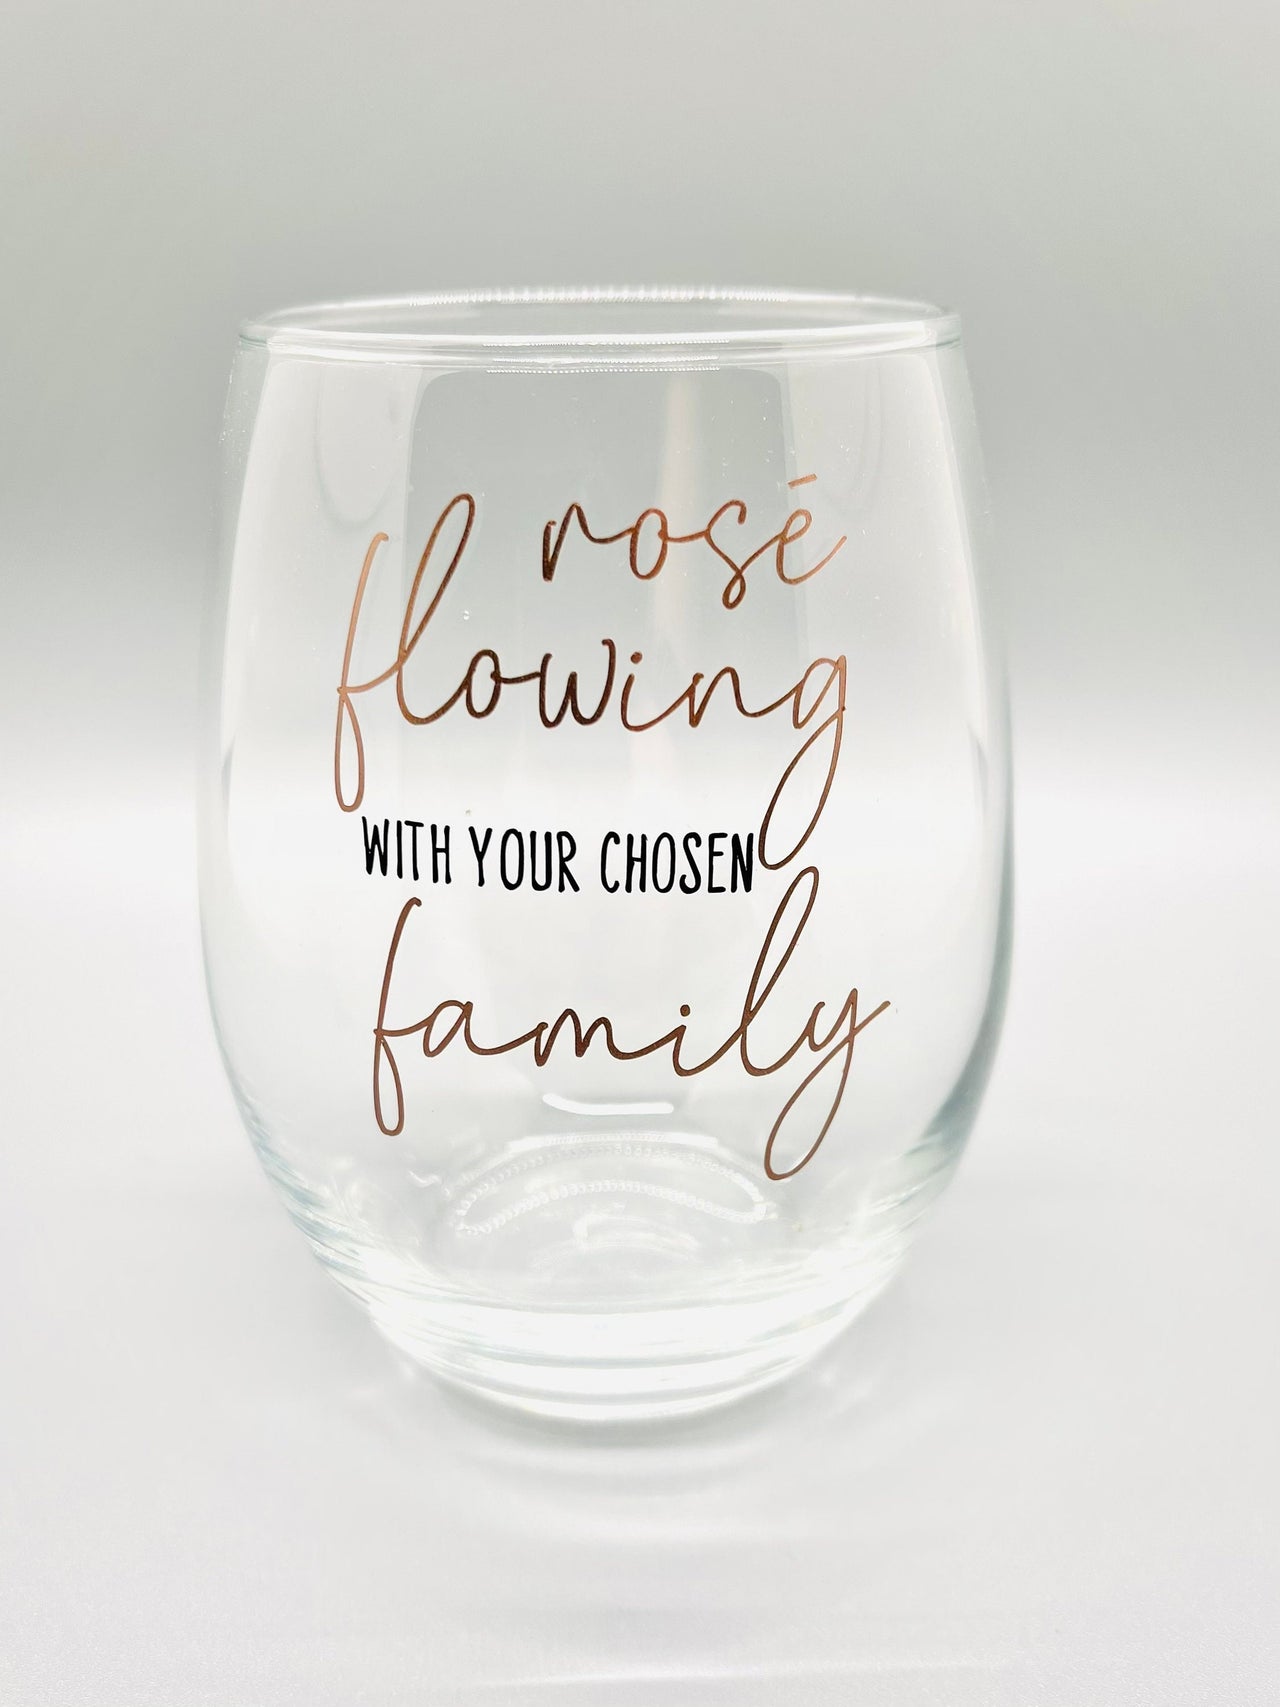 Feflosa - From a happy customer Our slanted wine glasses